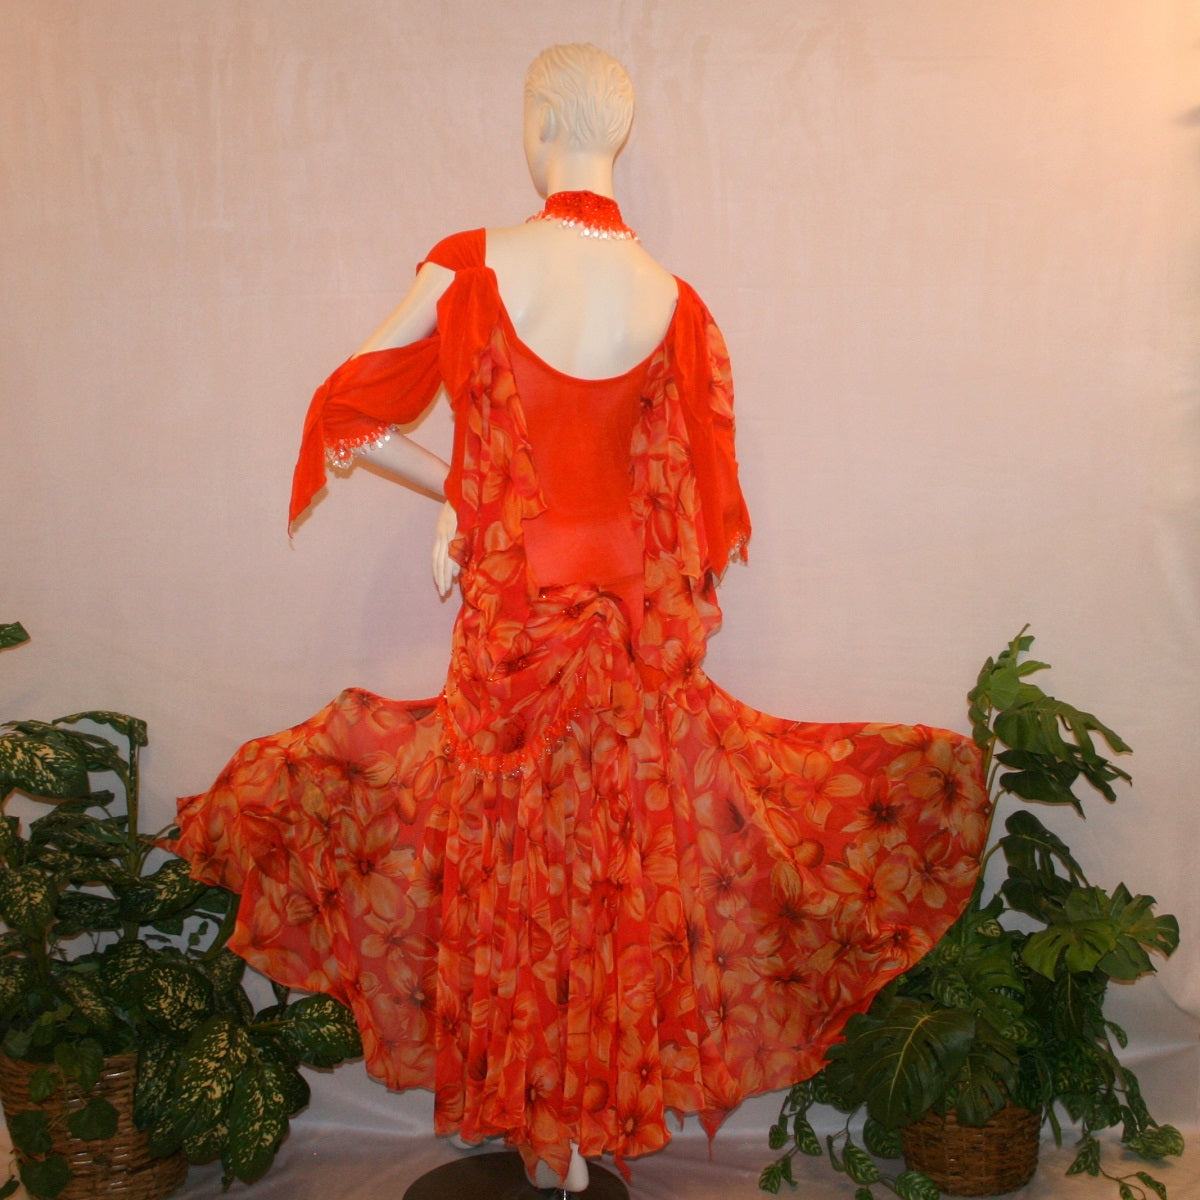 back view of Orange ballroom dress with 3/4 cold shoulder, billowy sleeves, created of luxurious orange solid slinky & yards of an orange tropical print textured chiffon. 